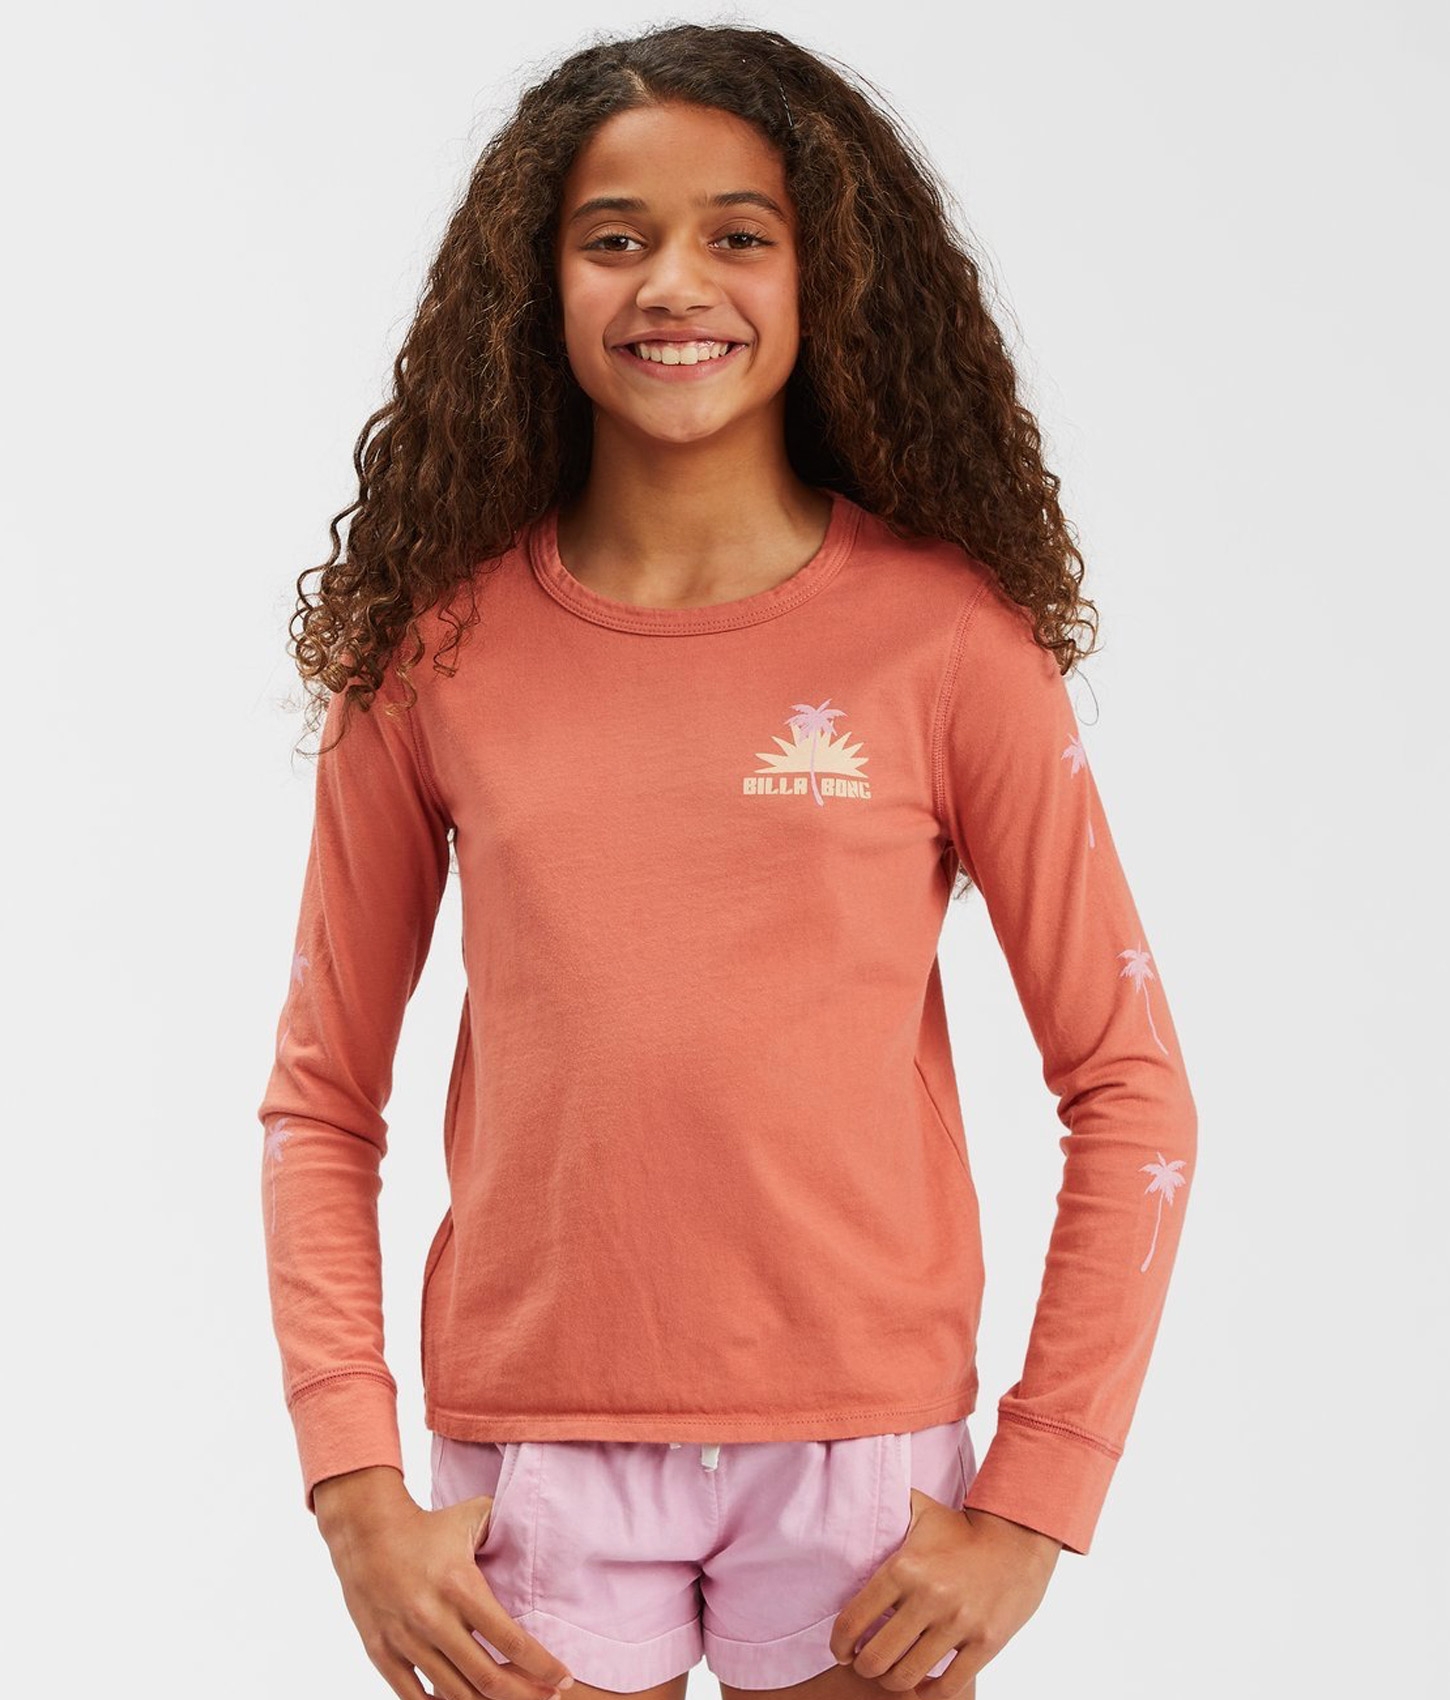 Girls Way Out West Long Sleeve T-Shirt